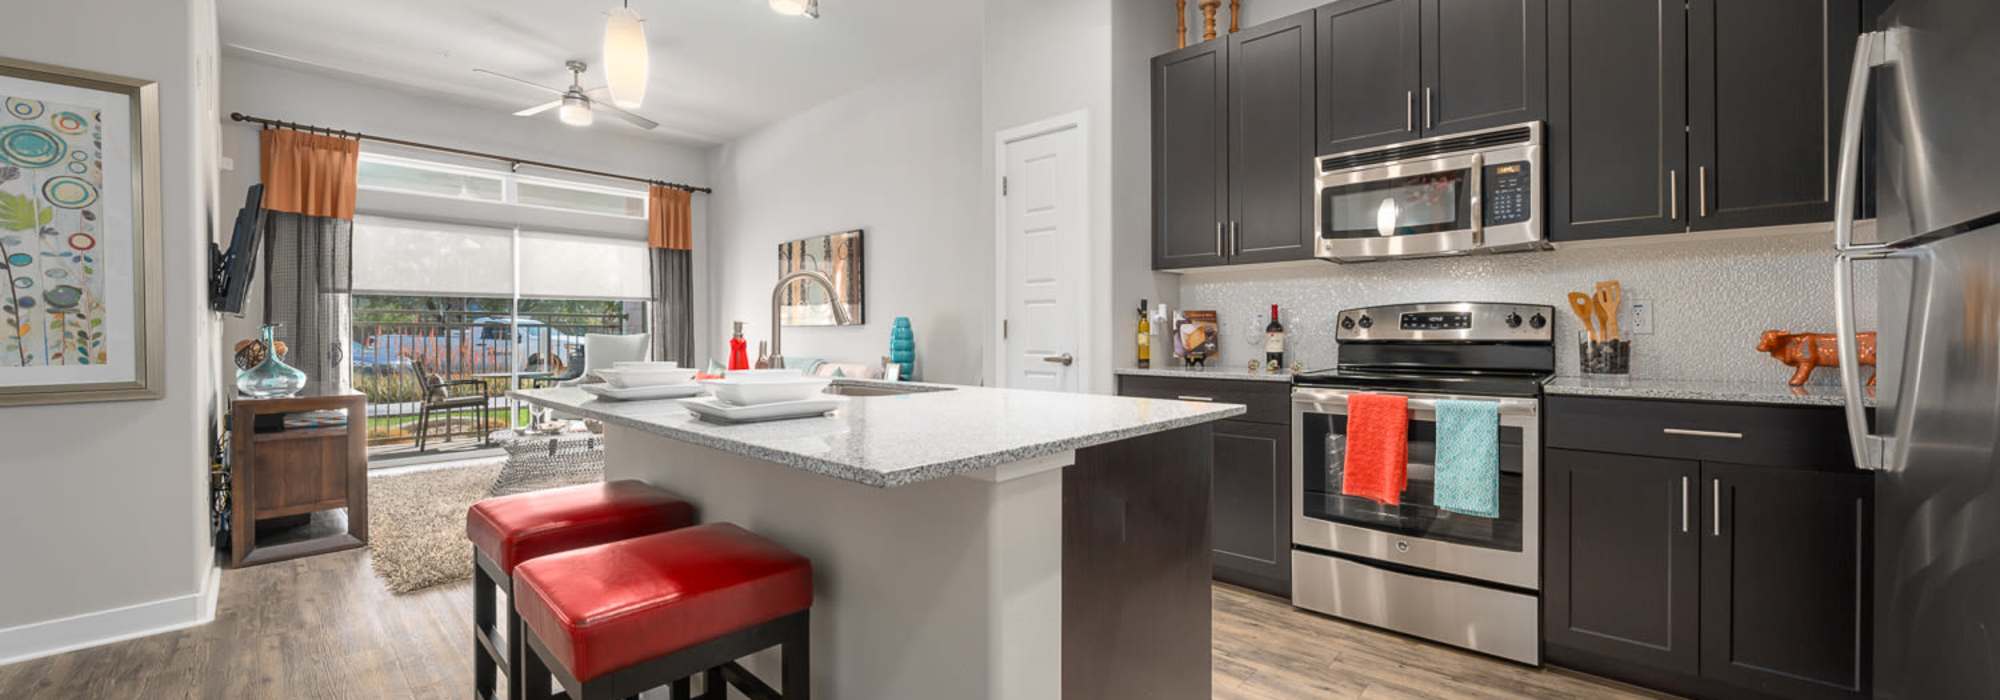 Kitchen & Living Room at The Hyve | Apartments in Tempe, Arizona